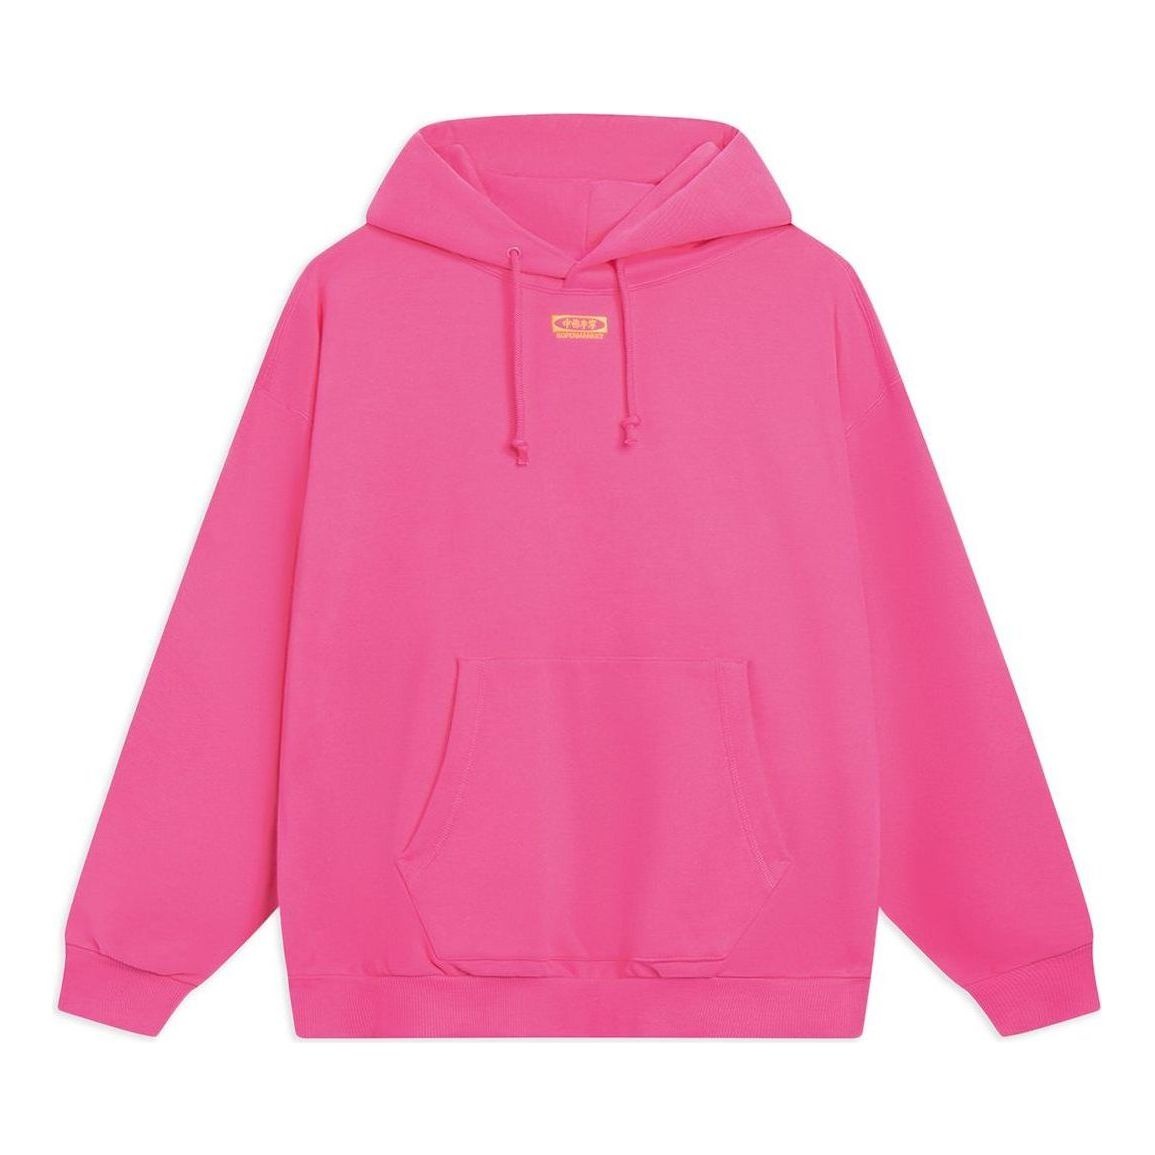 Li-Ning Chinese Culture Graphic Hoodie 'Pink' AWDT239-2 - 1